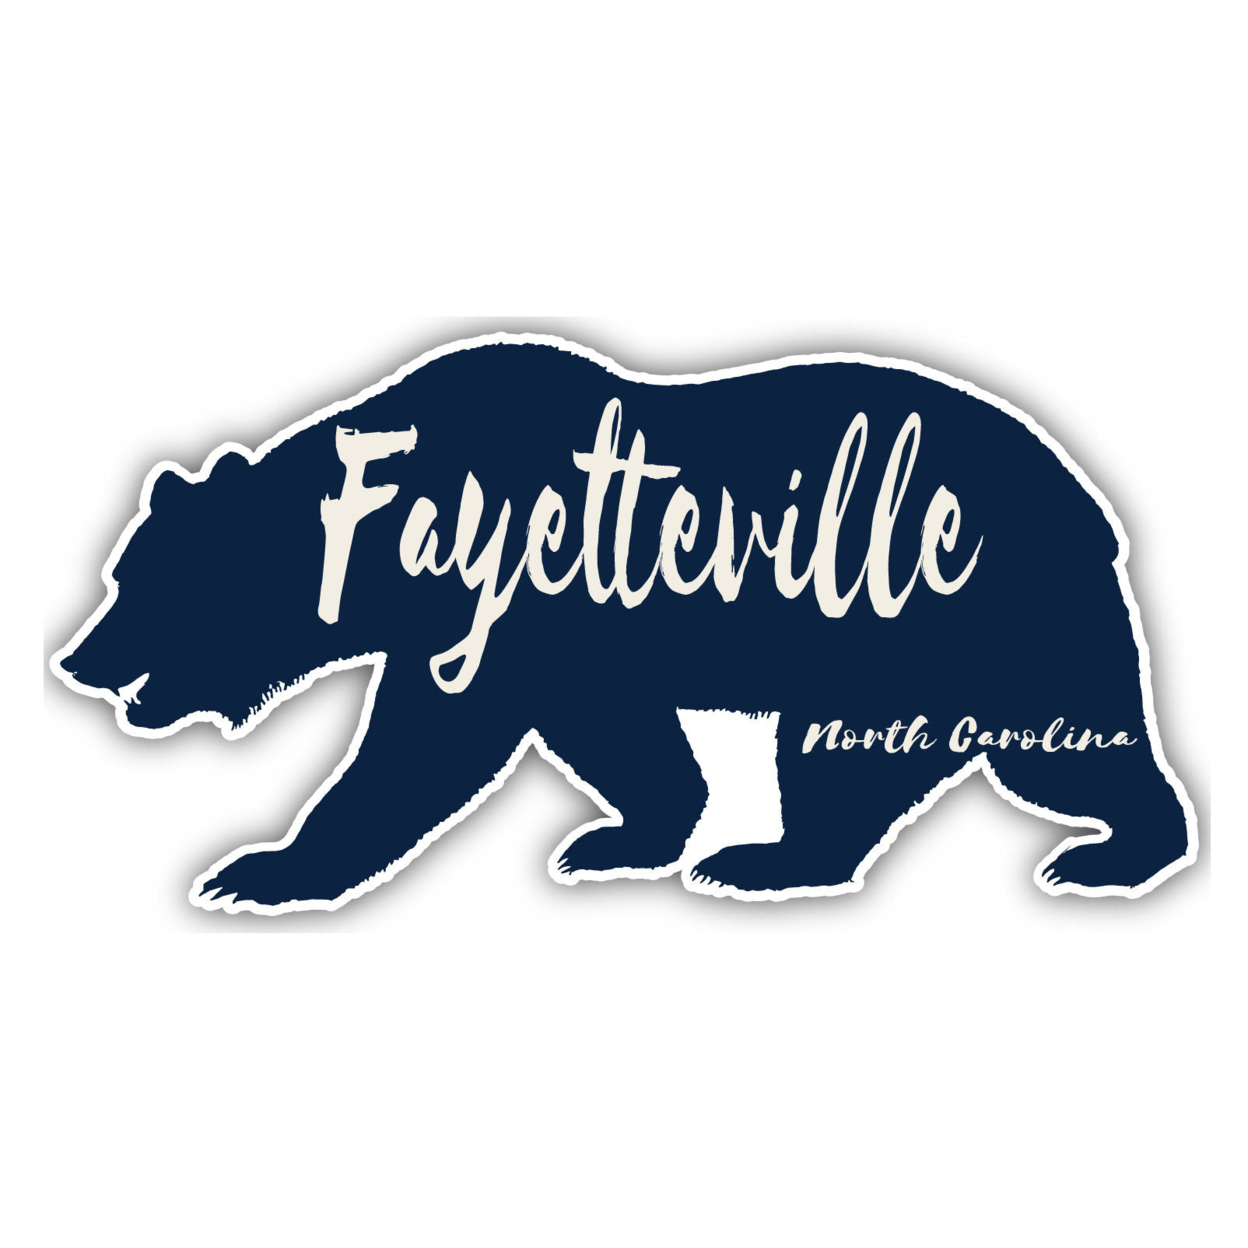 Fayetteville North Carolina Souvenir Decorative Stickers (Choose Theme And Size) - 4-Pack, 10-Inch, Camp Life